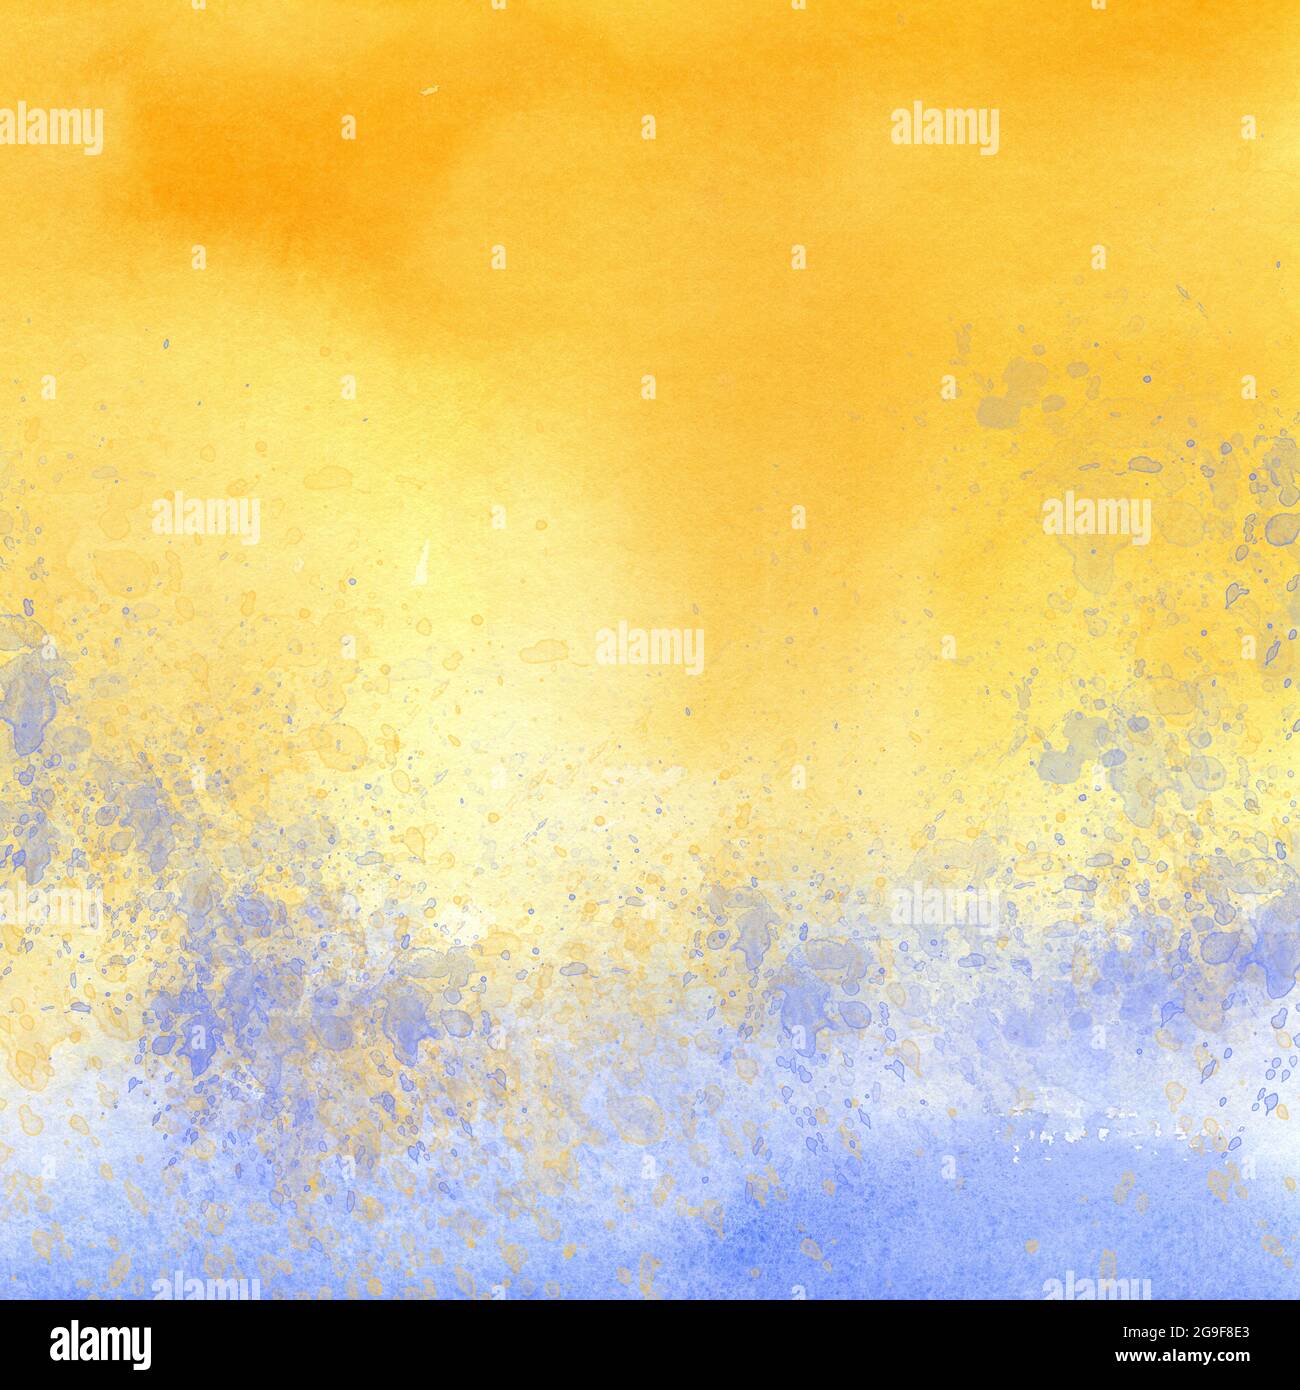 abstract sunny watercolor background and blue texture like water spalshes Stock Photo